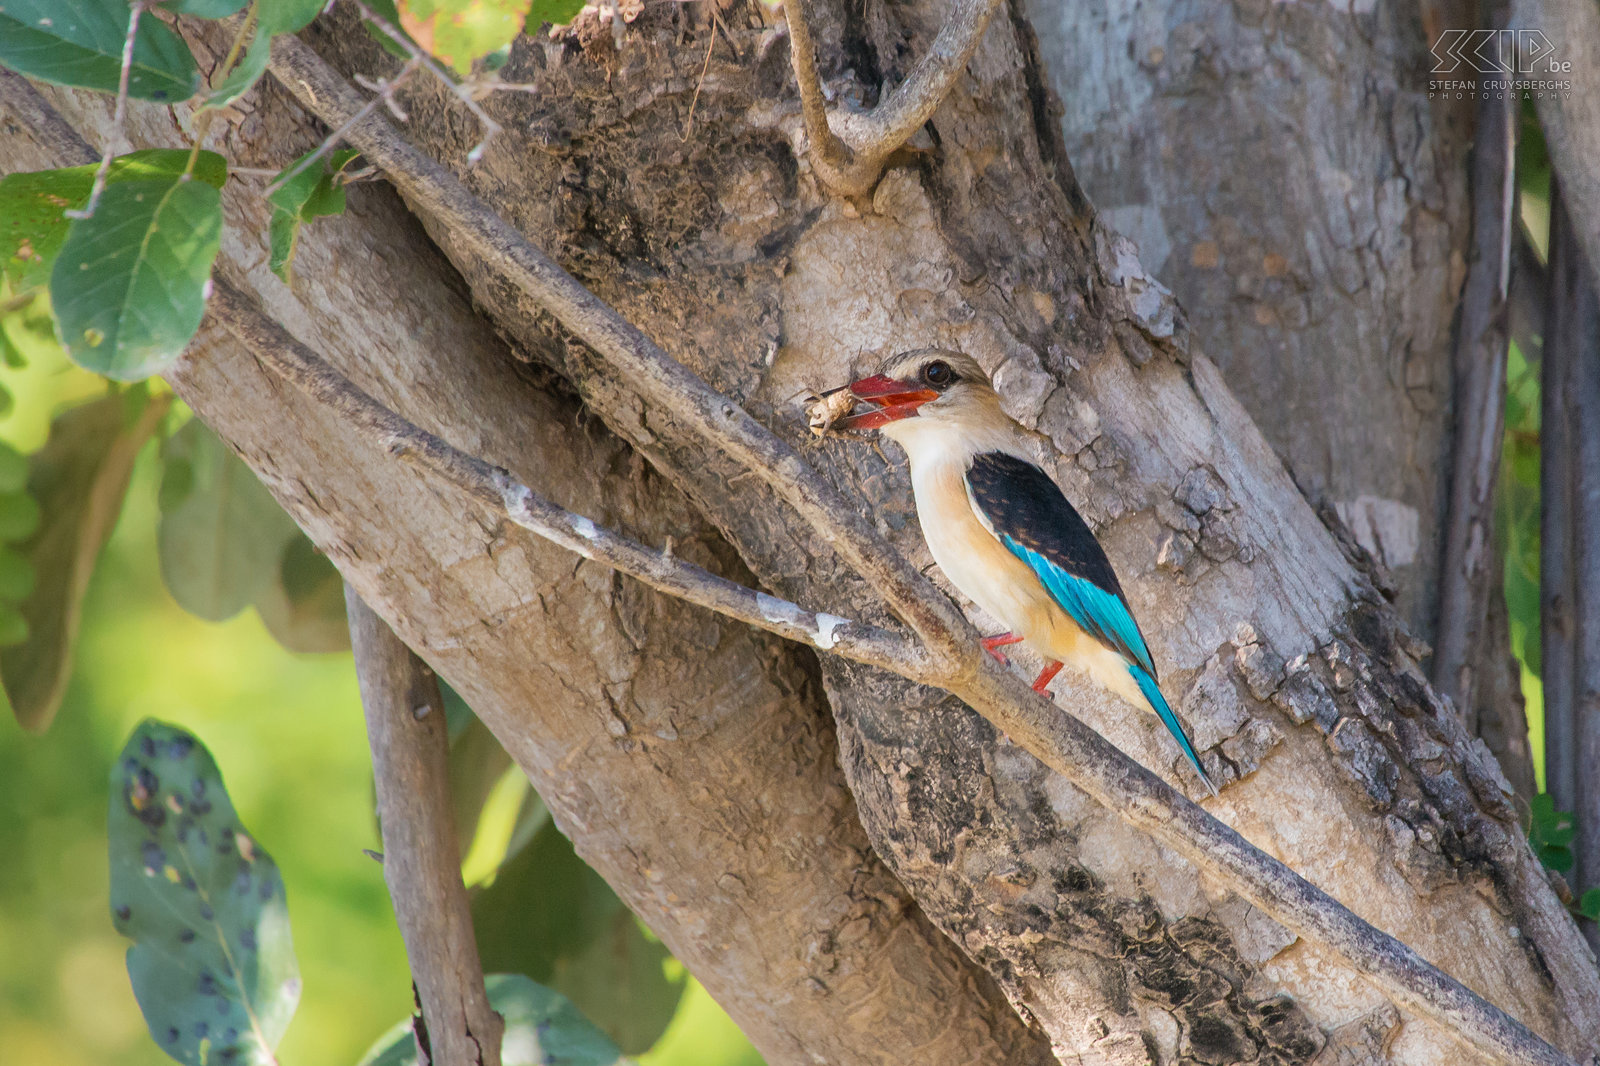 Lower Zambezi - Brown-hooded kingfisher This brown-hooded kingfisher (Halcyon albiventris) has catched a grasshopper and is eating it while we are peddling through. Stefan Cruysberghs